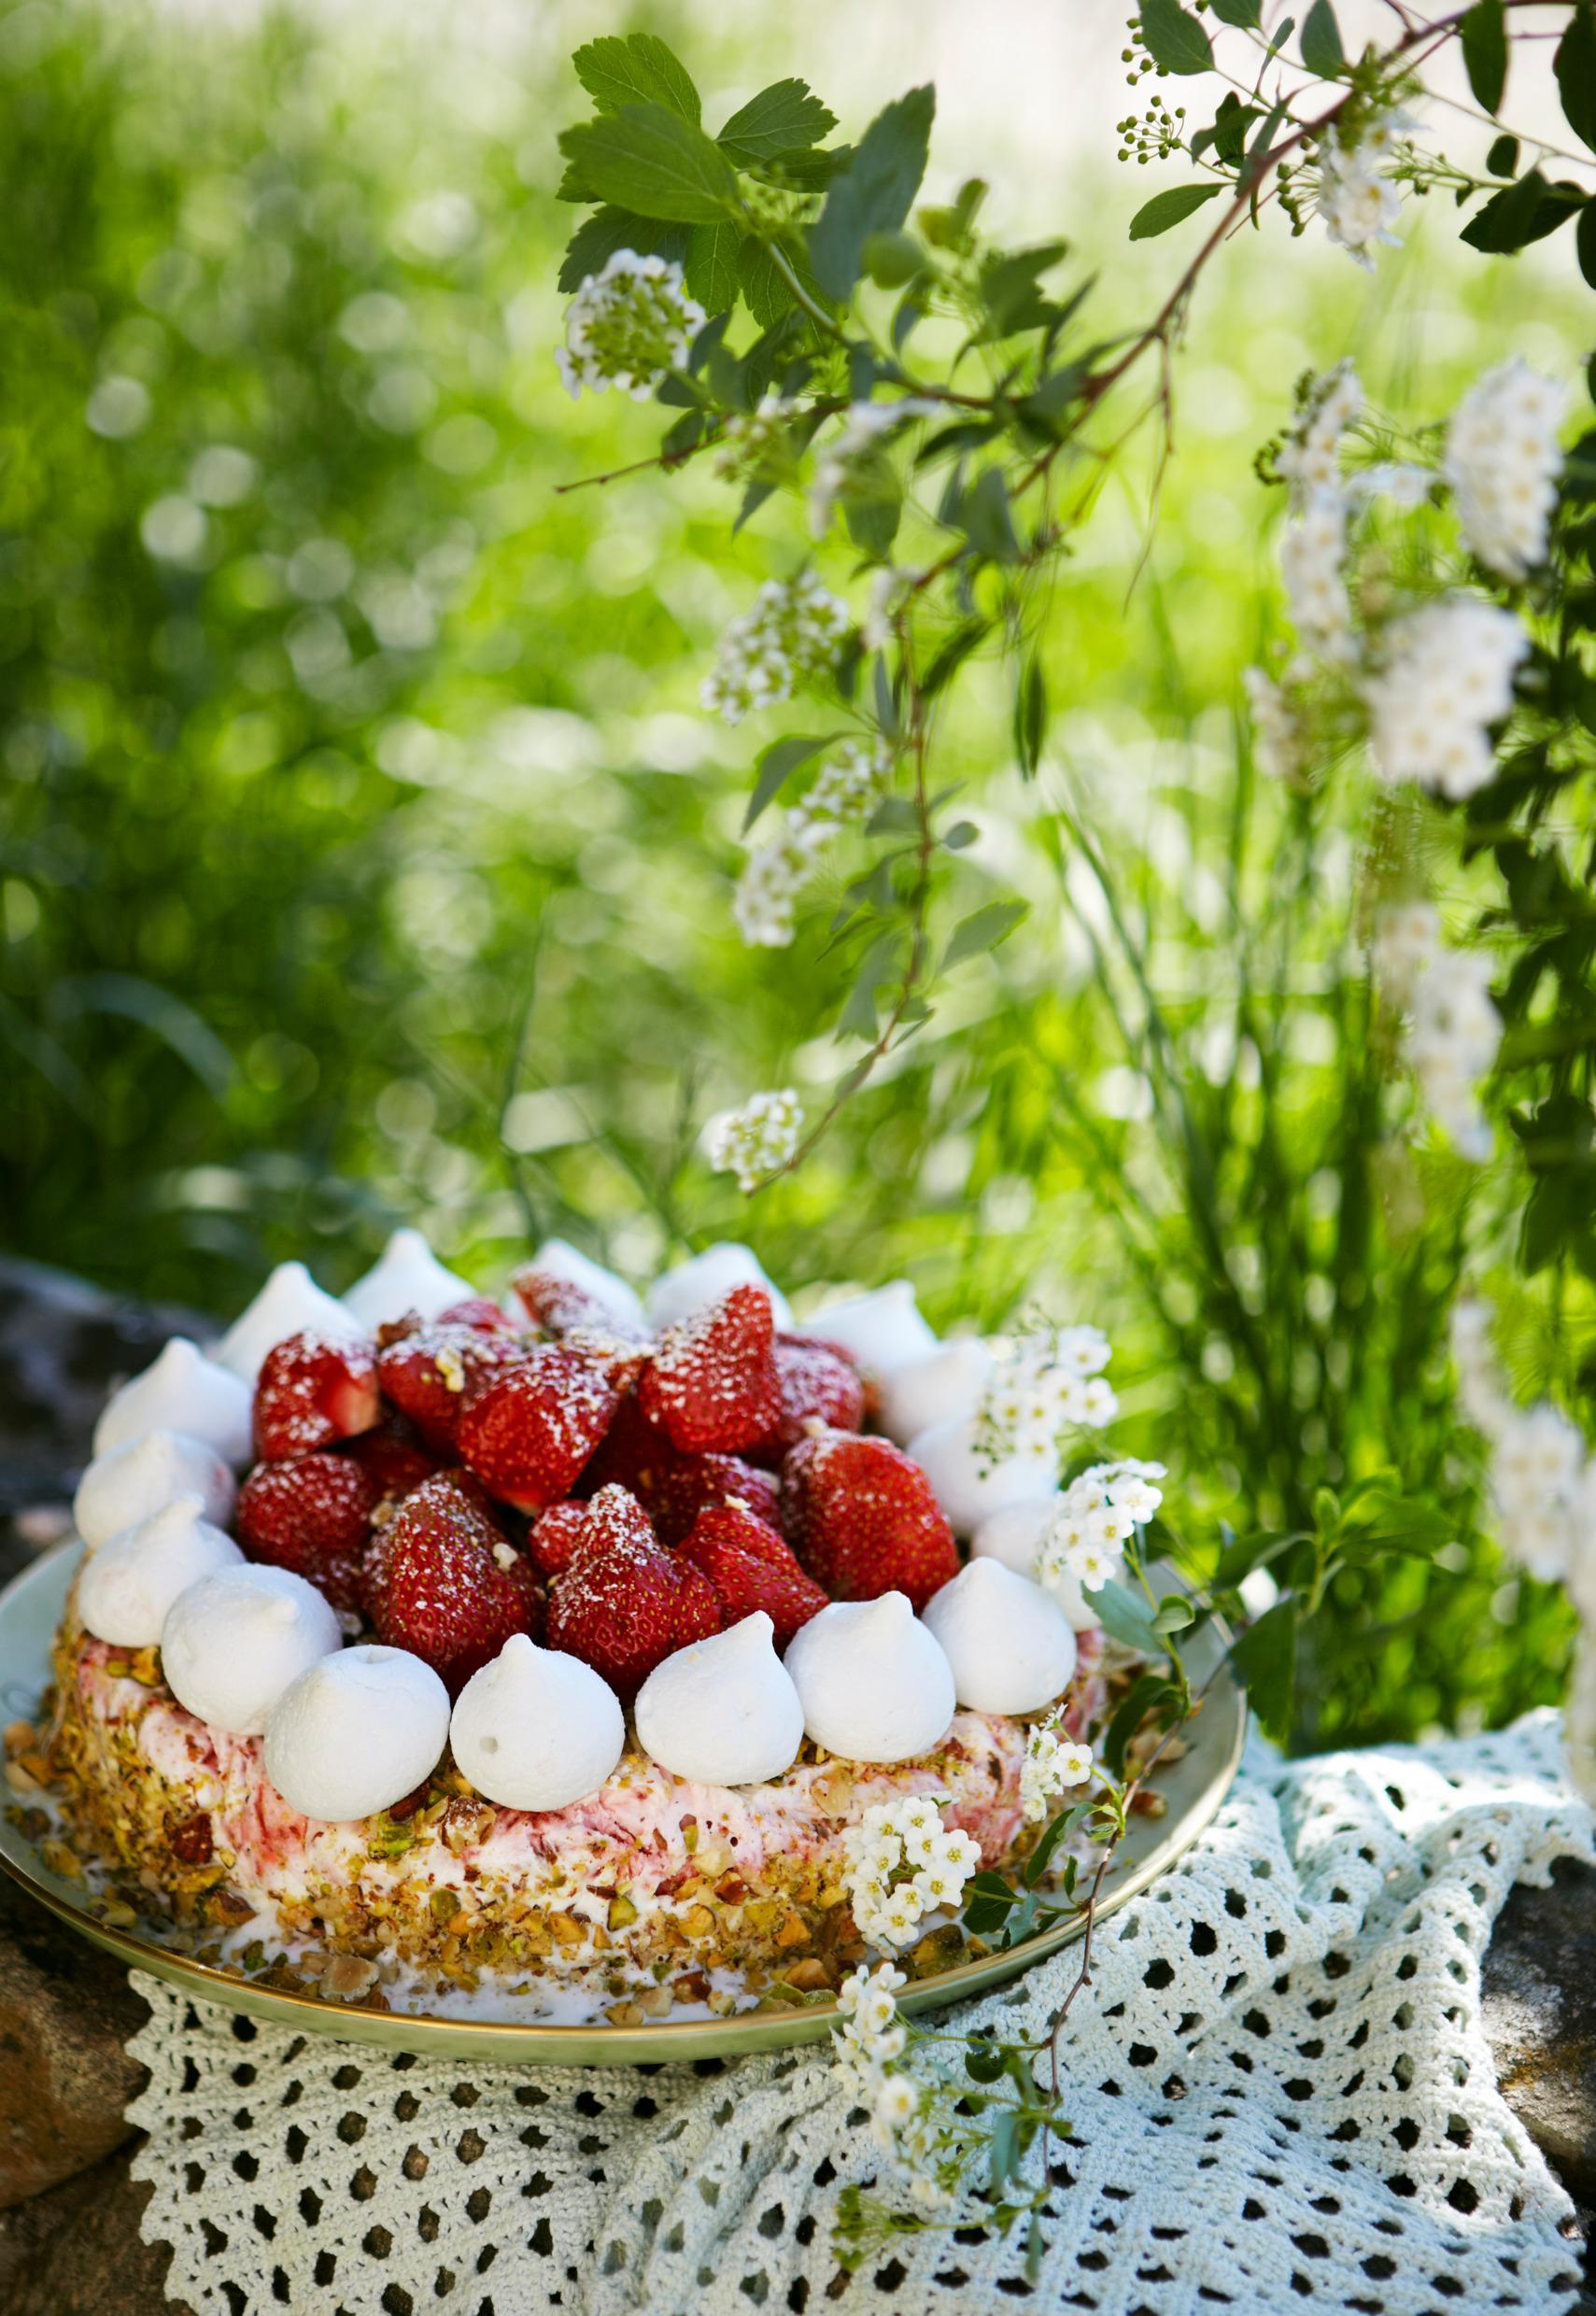 A strawberry cake is placed on a Dollie in nature.